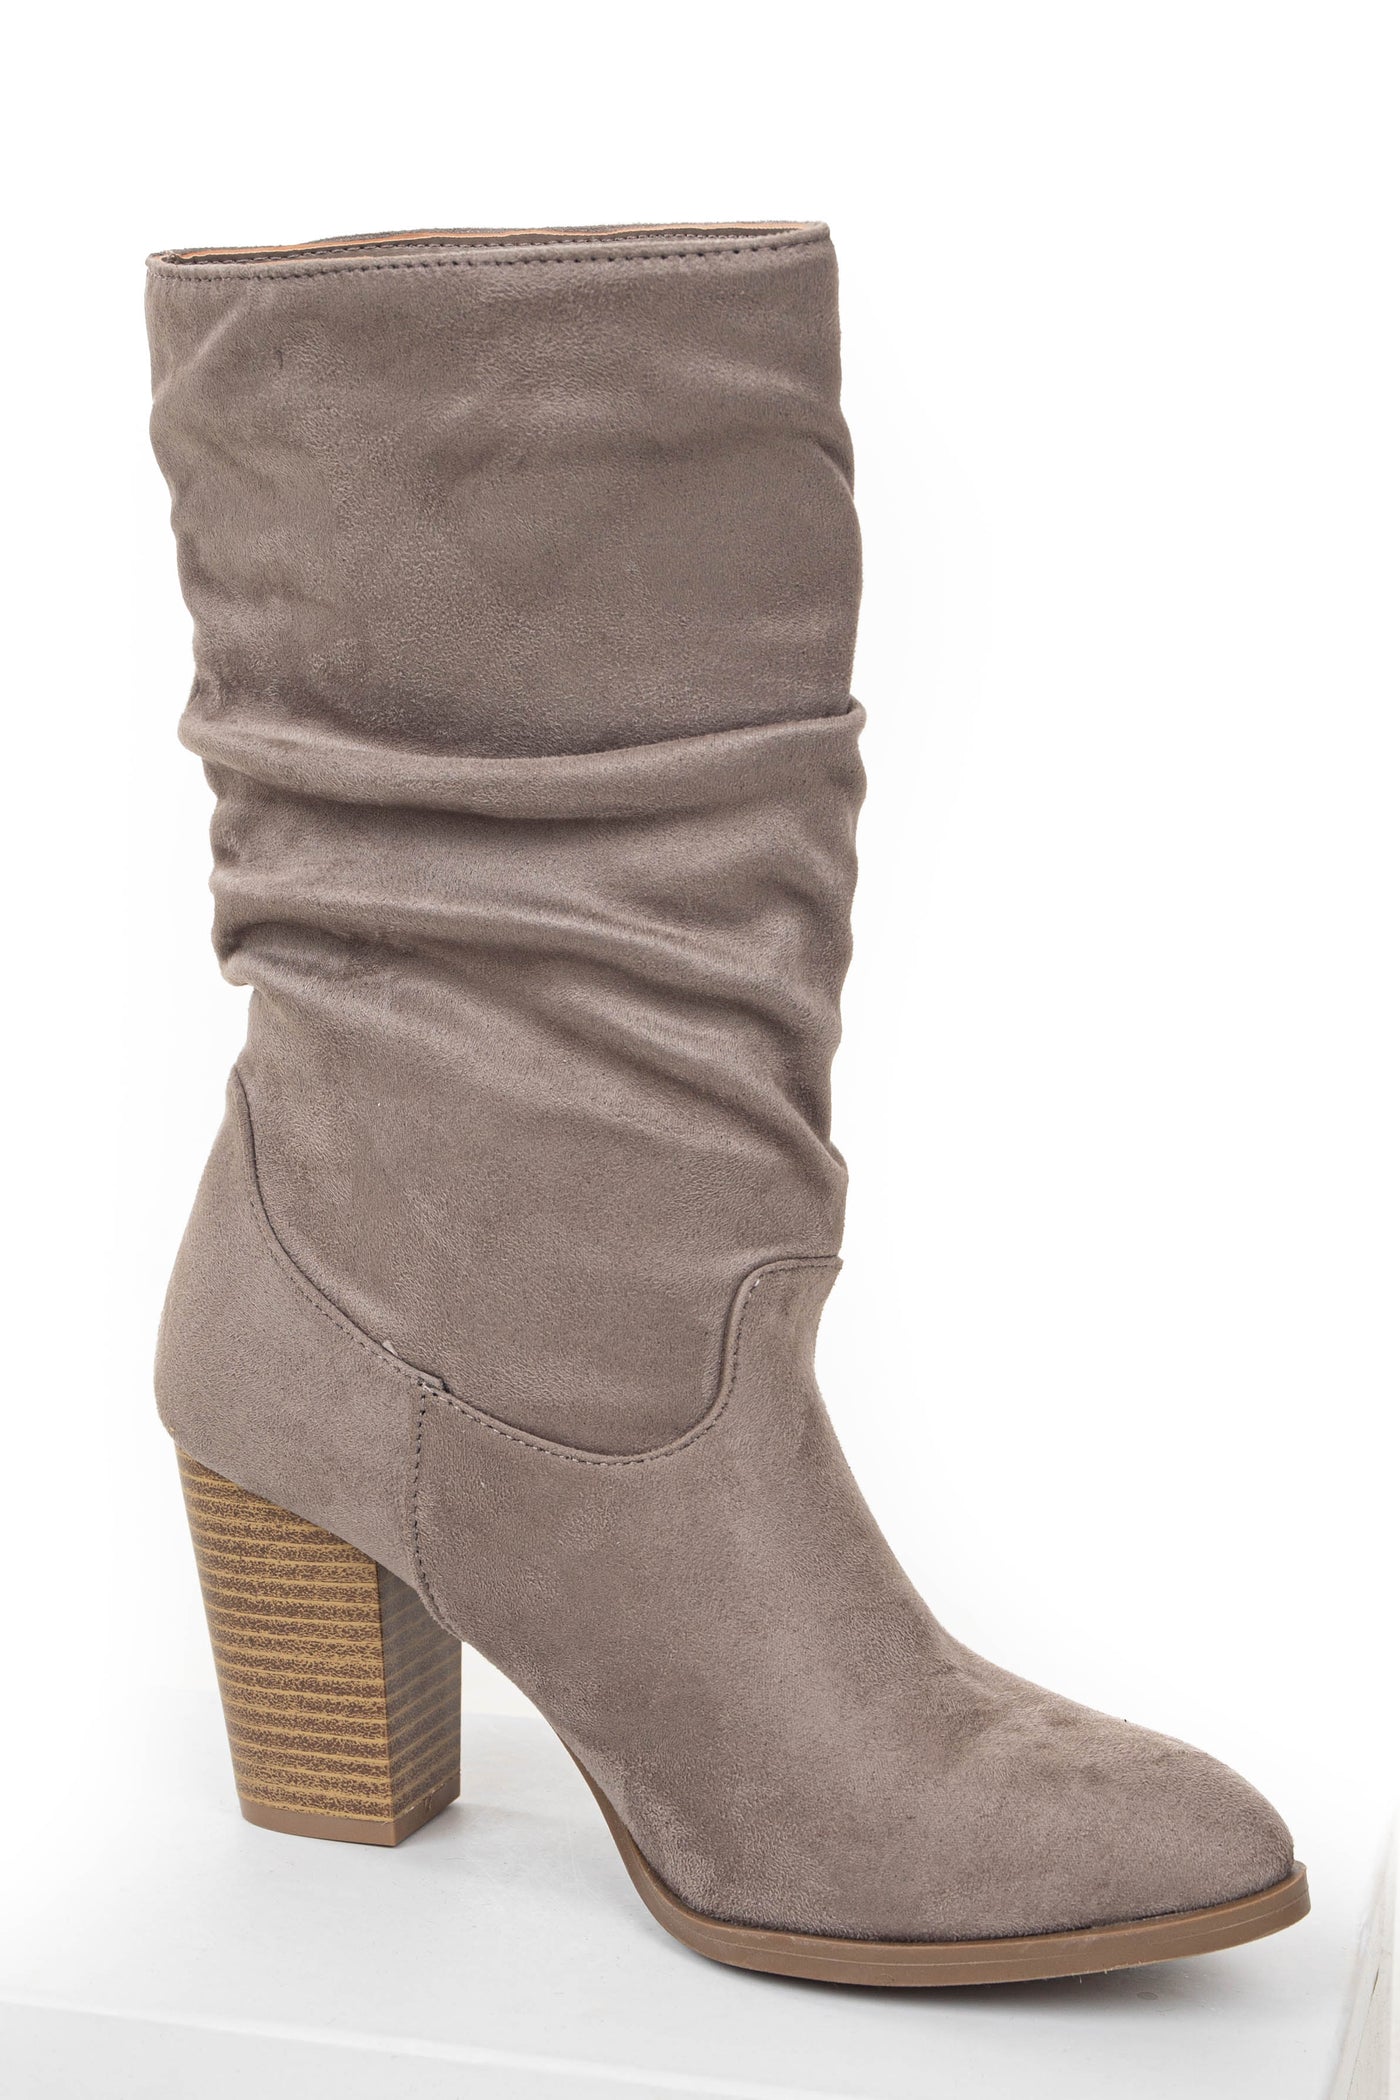 Light Taupe Faux Suede Slouchy Mid Calf Heel Boots